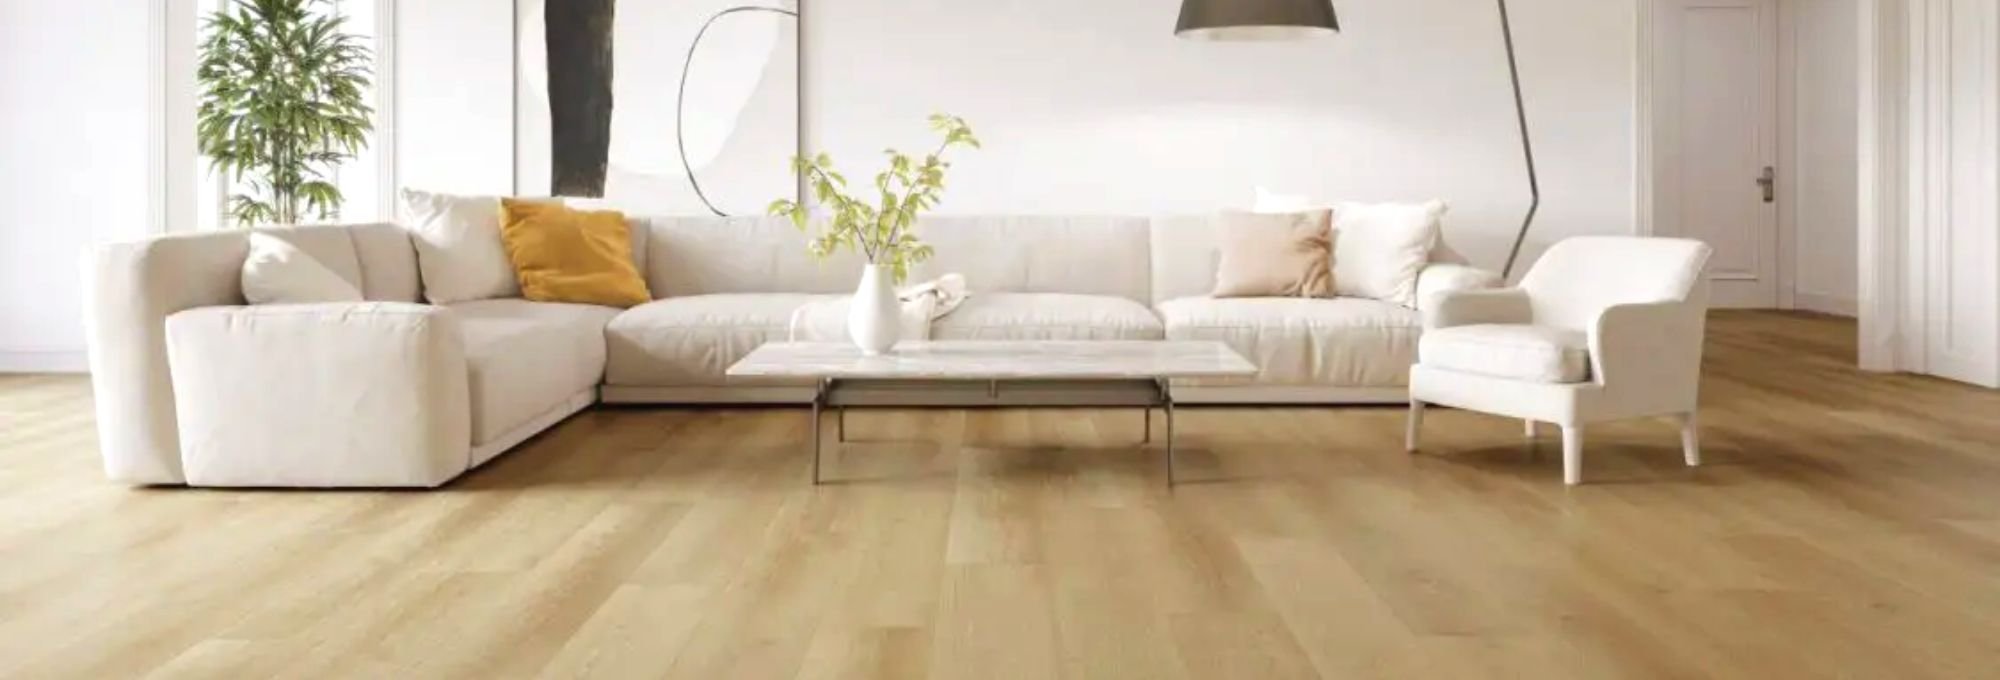 Shop Flooring Products from Central Floor Supply in Fresno